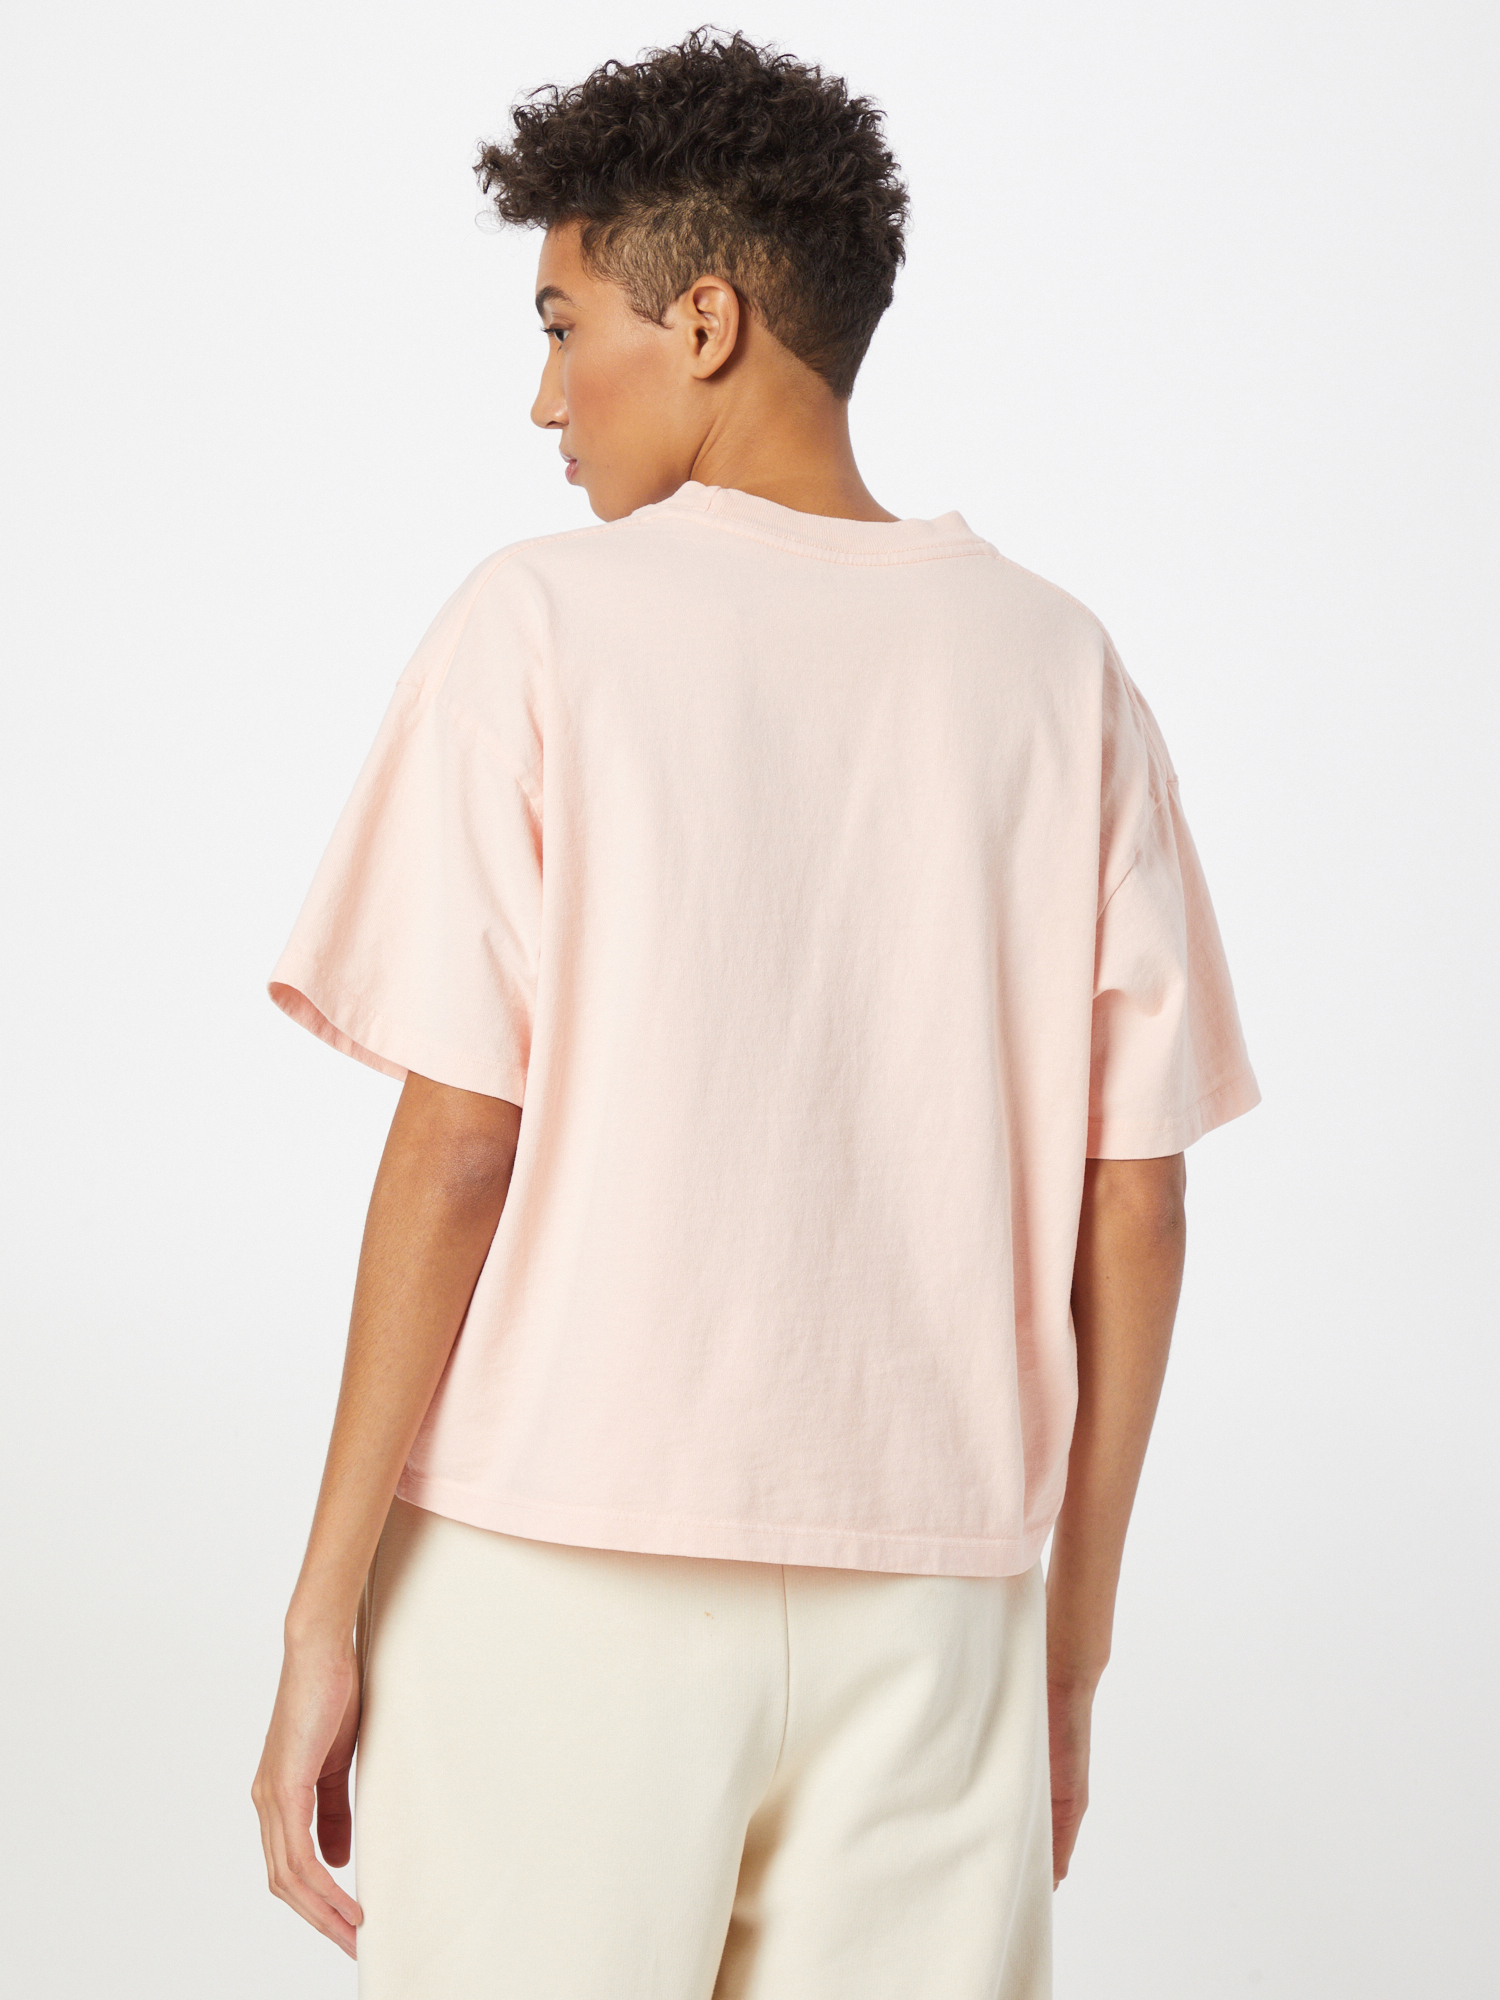 Obey T- Shirt in Rosa, Puder 